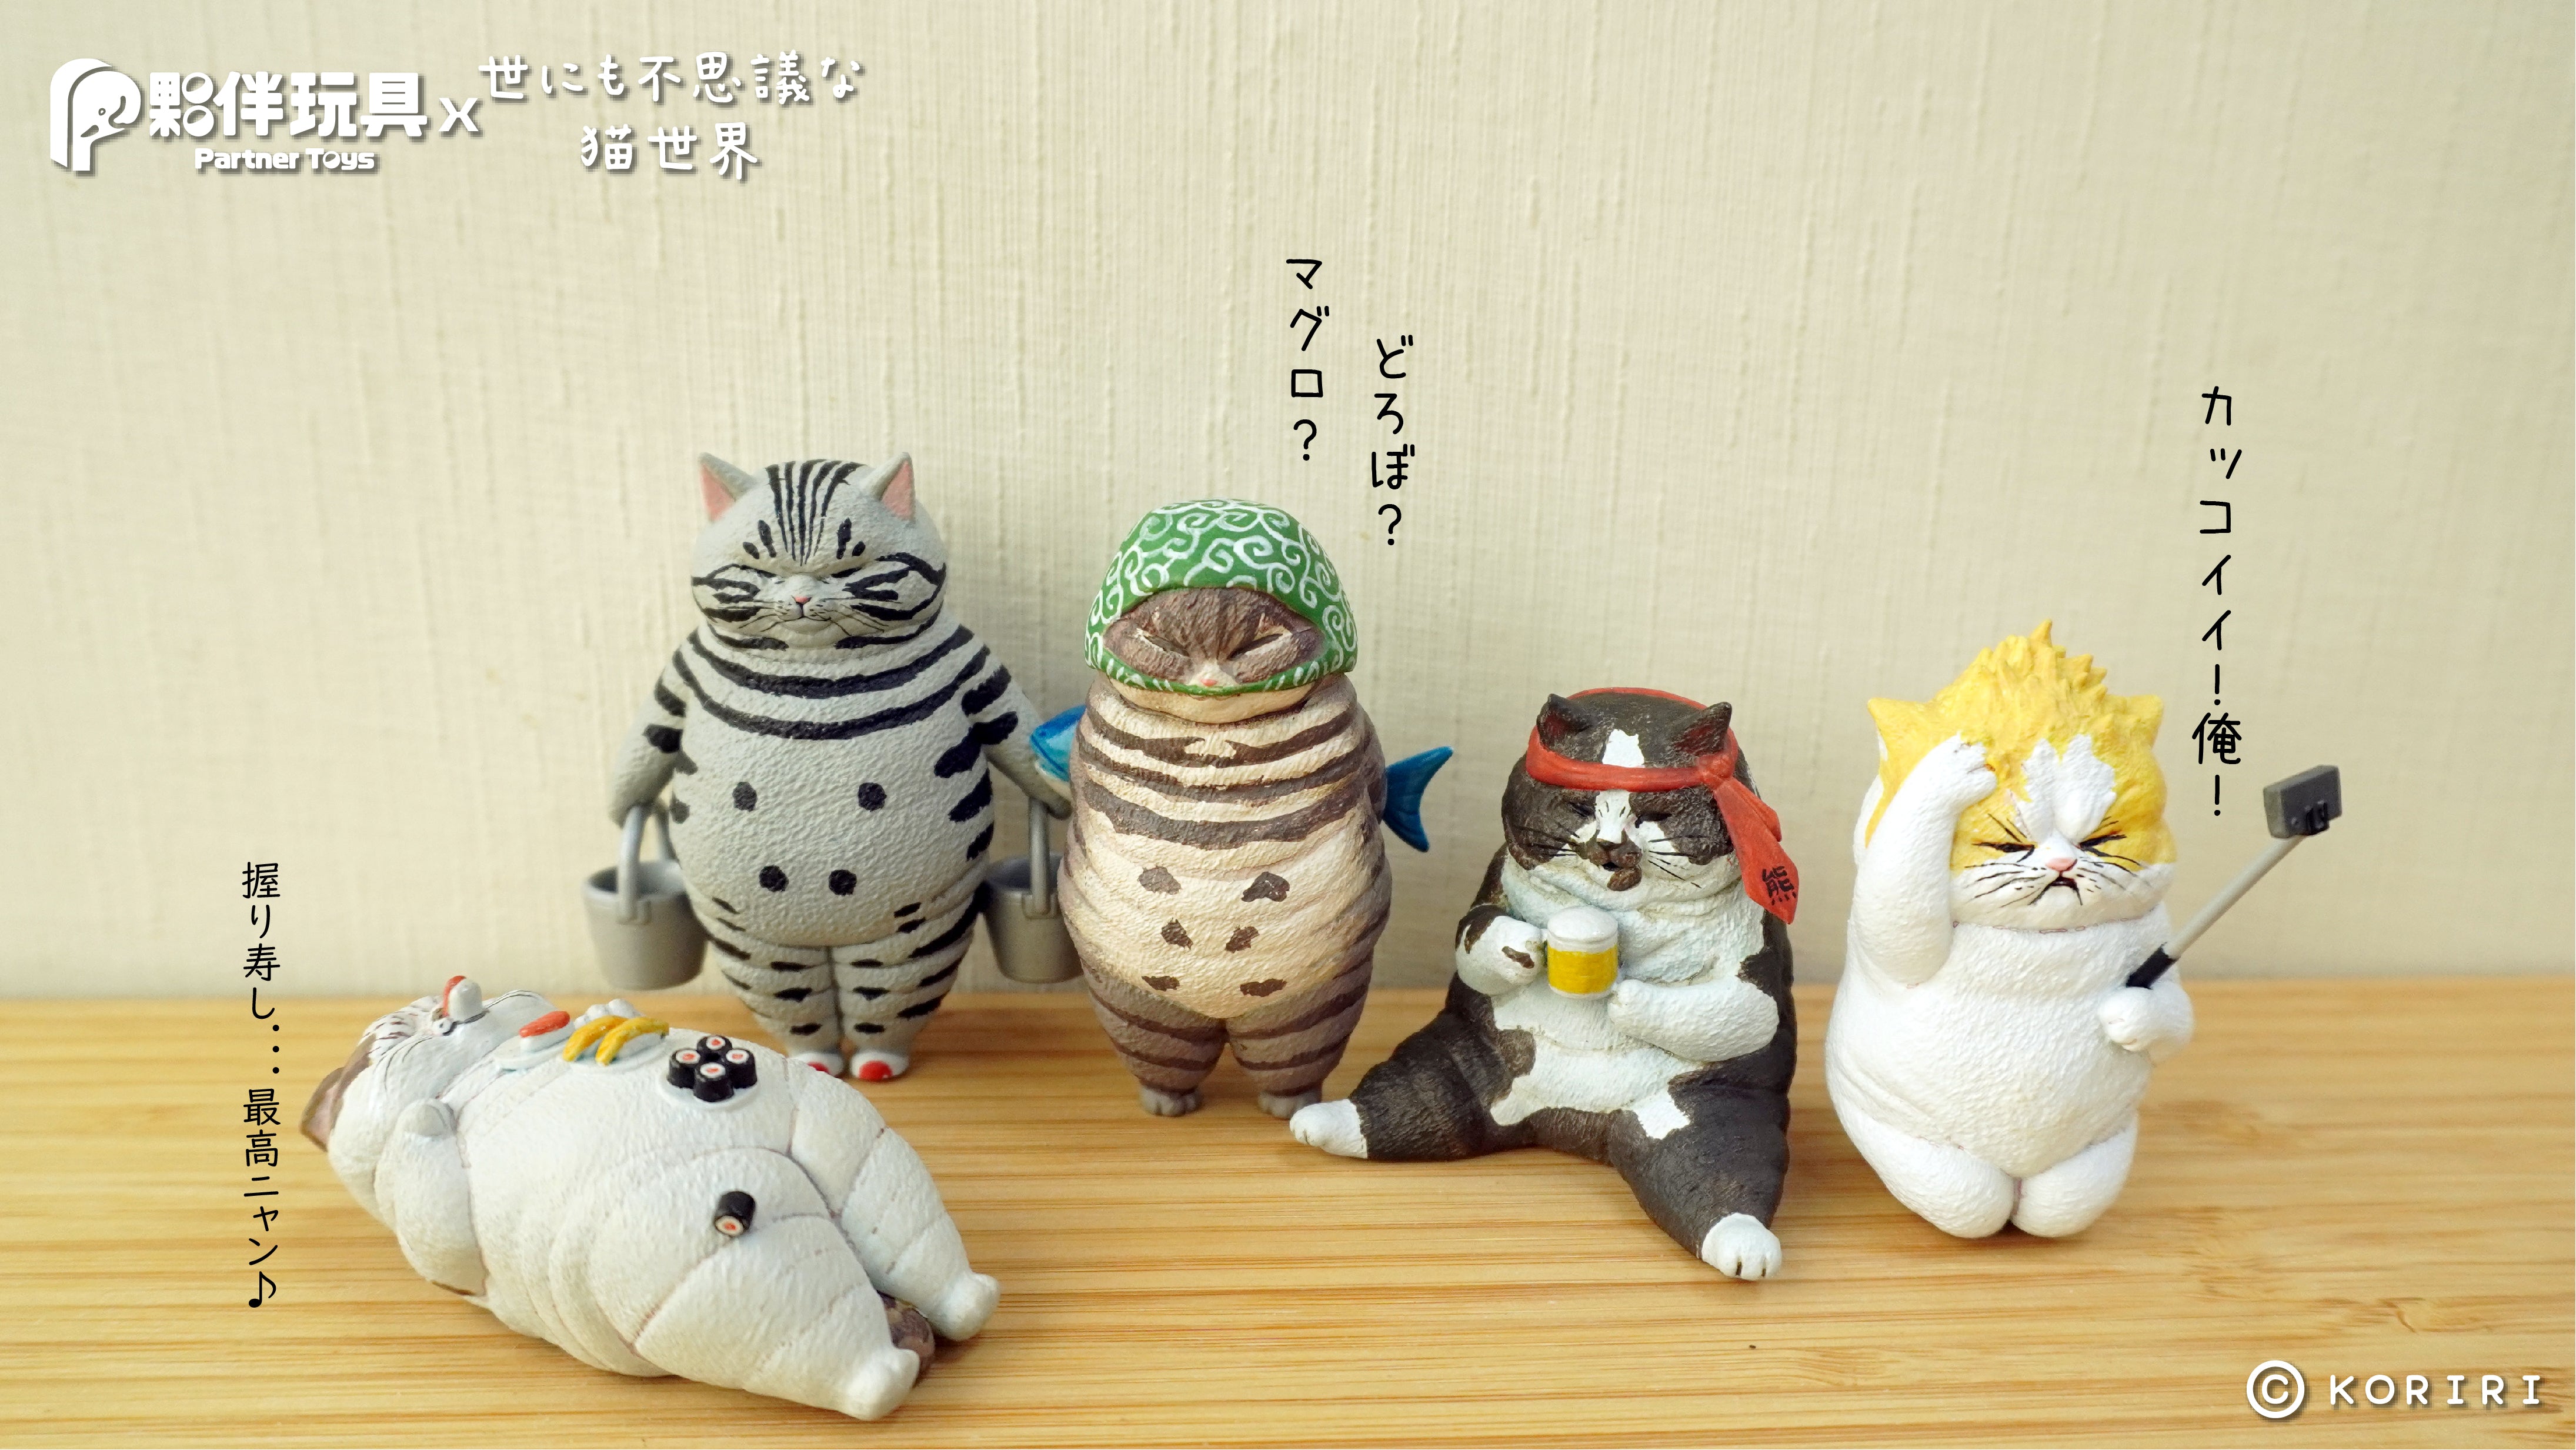 Strange World Of Cats Gacha Series: Group of cat figurines, including one holding buckets and a mug, with unique accessories.